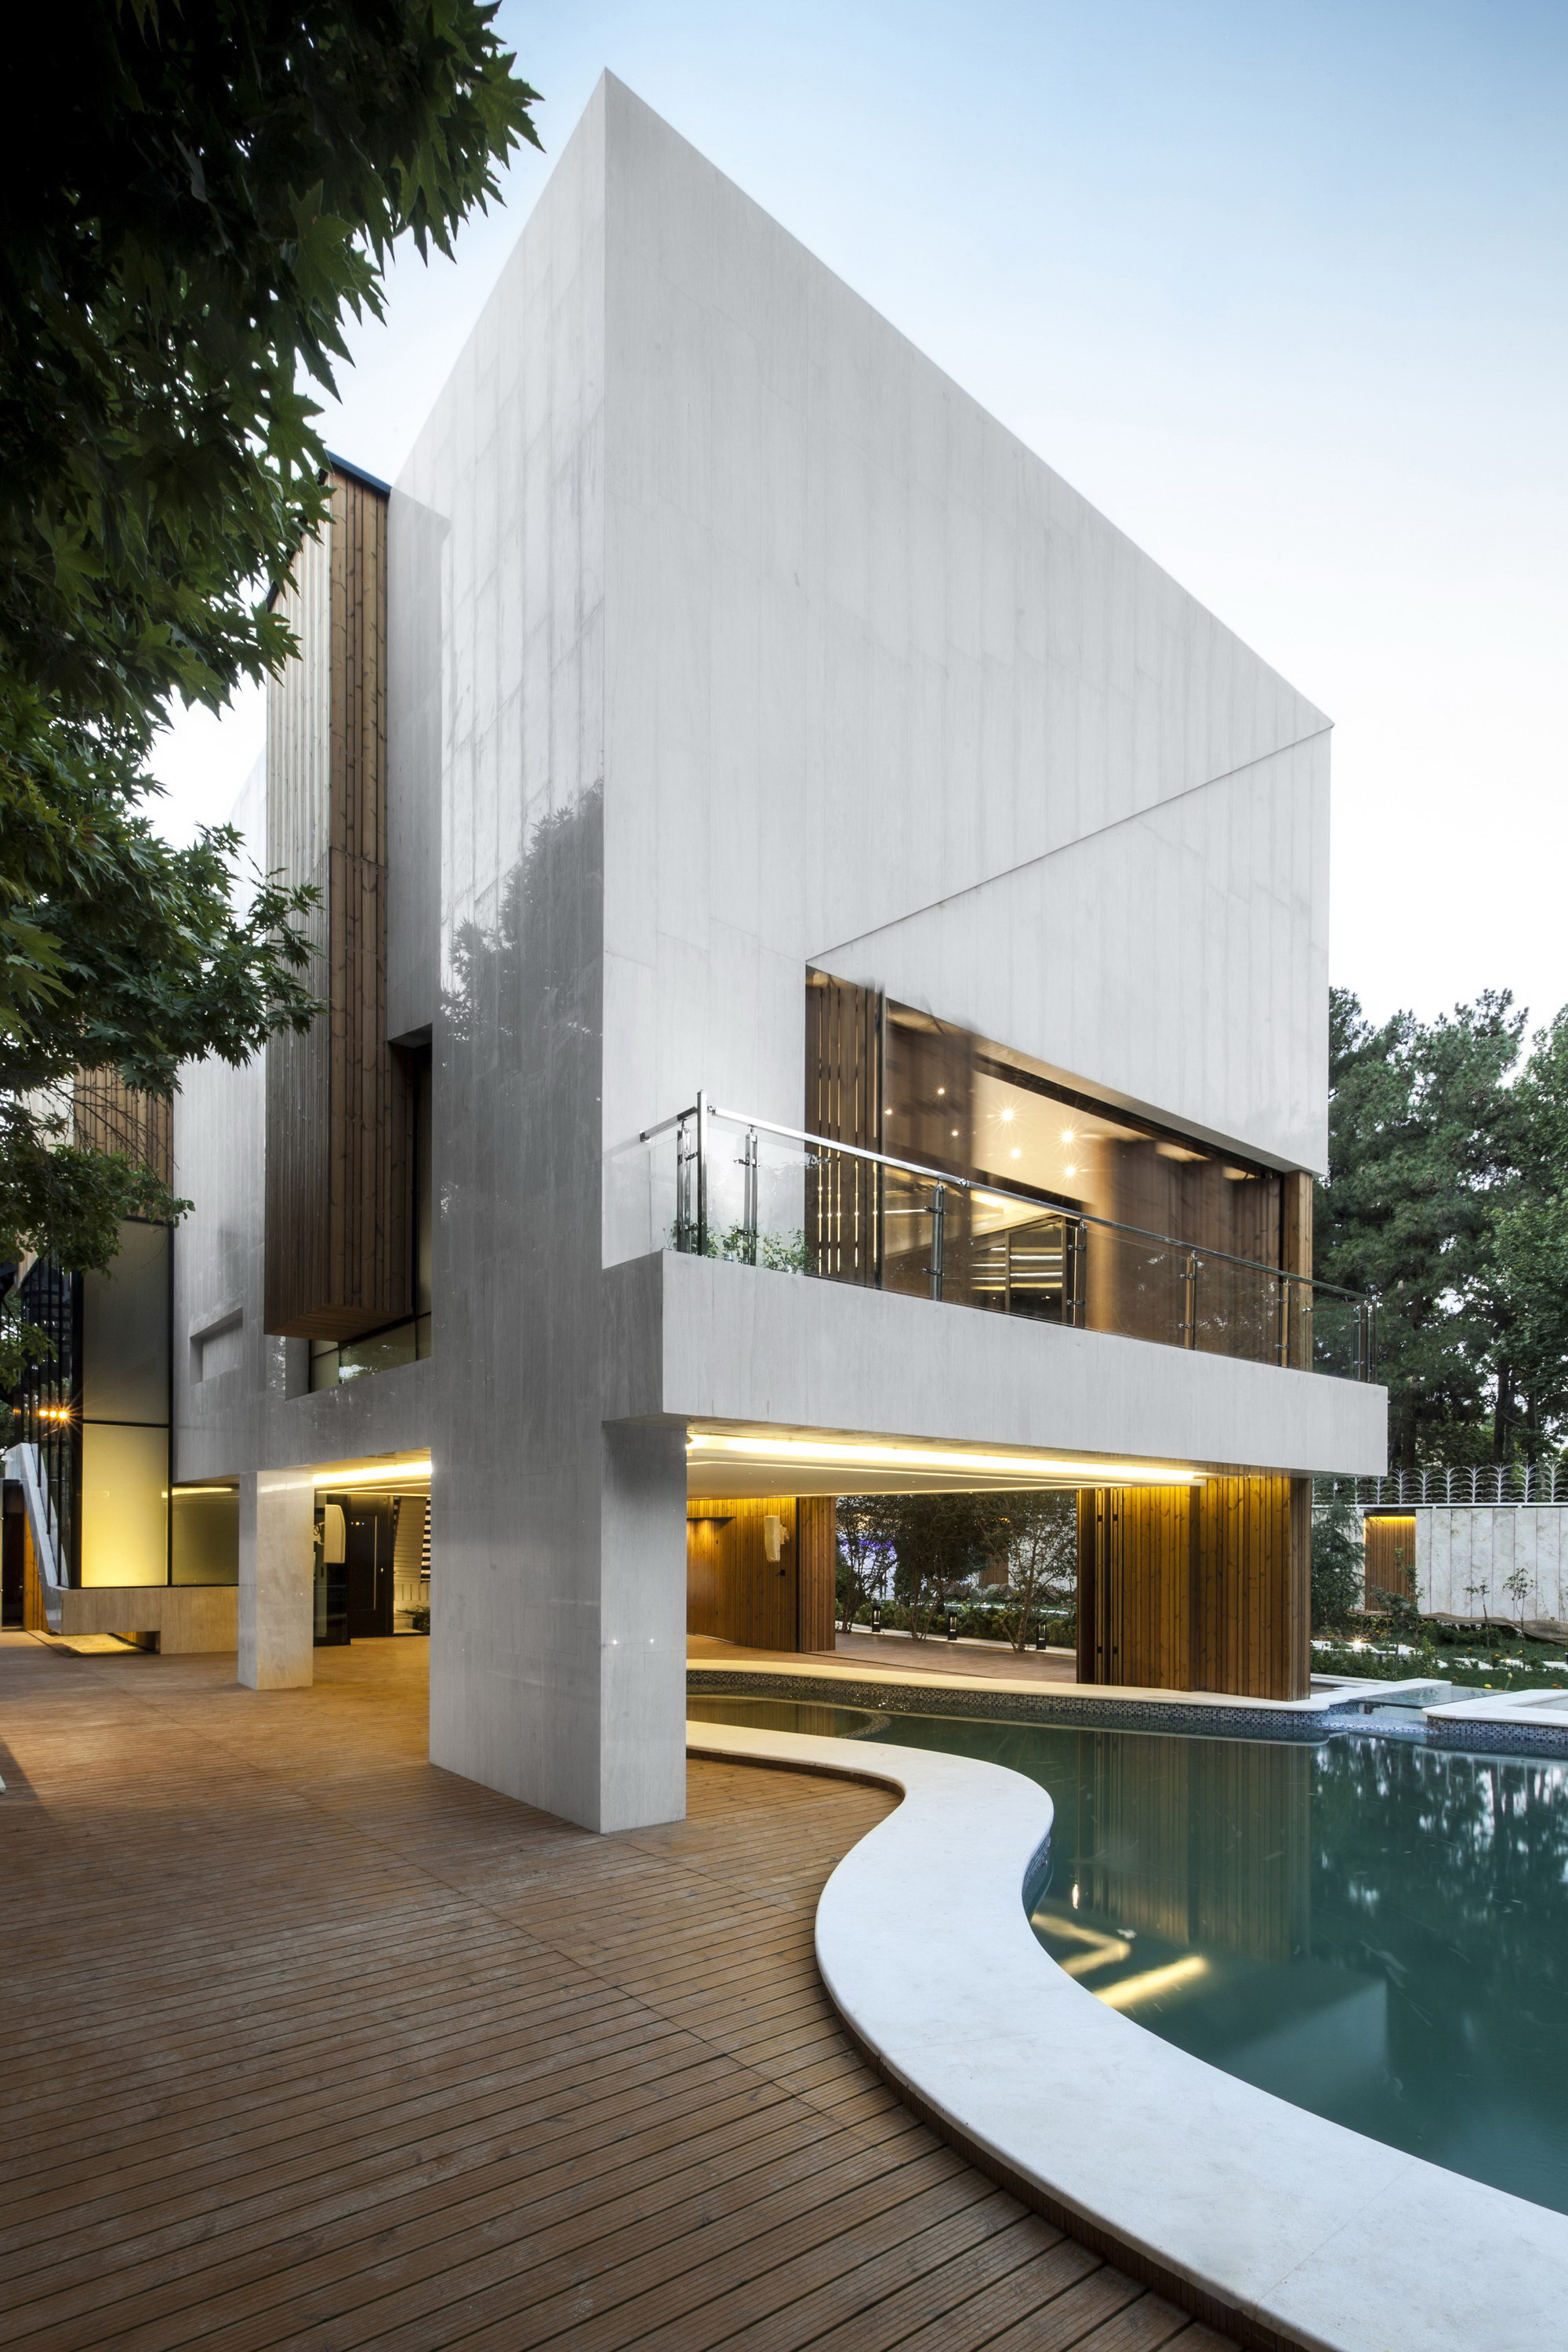 Kooshk House by Sarsayeh Architectural Office